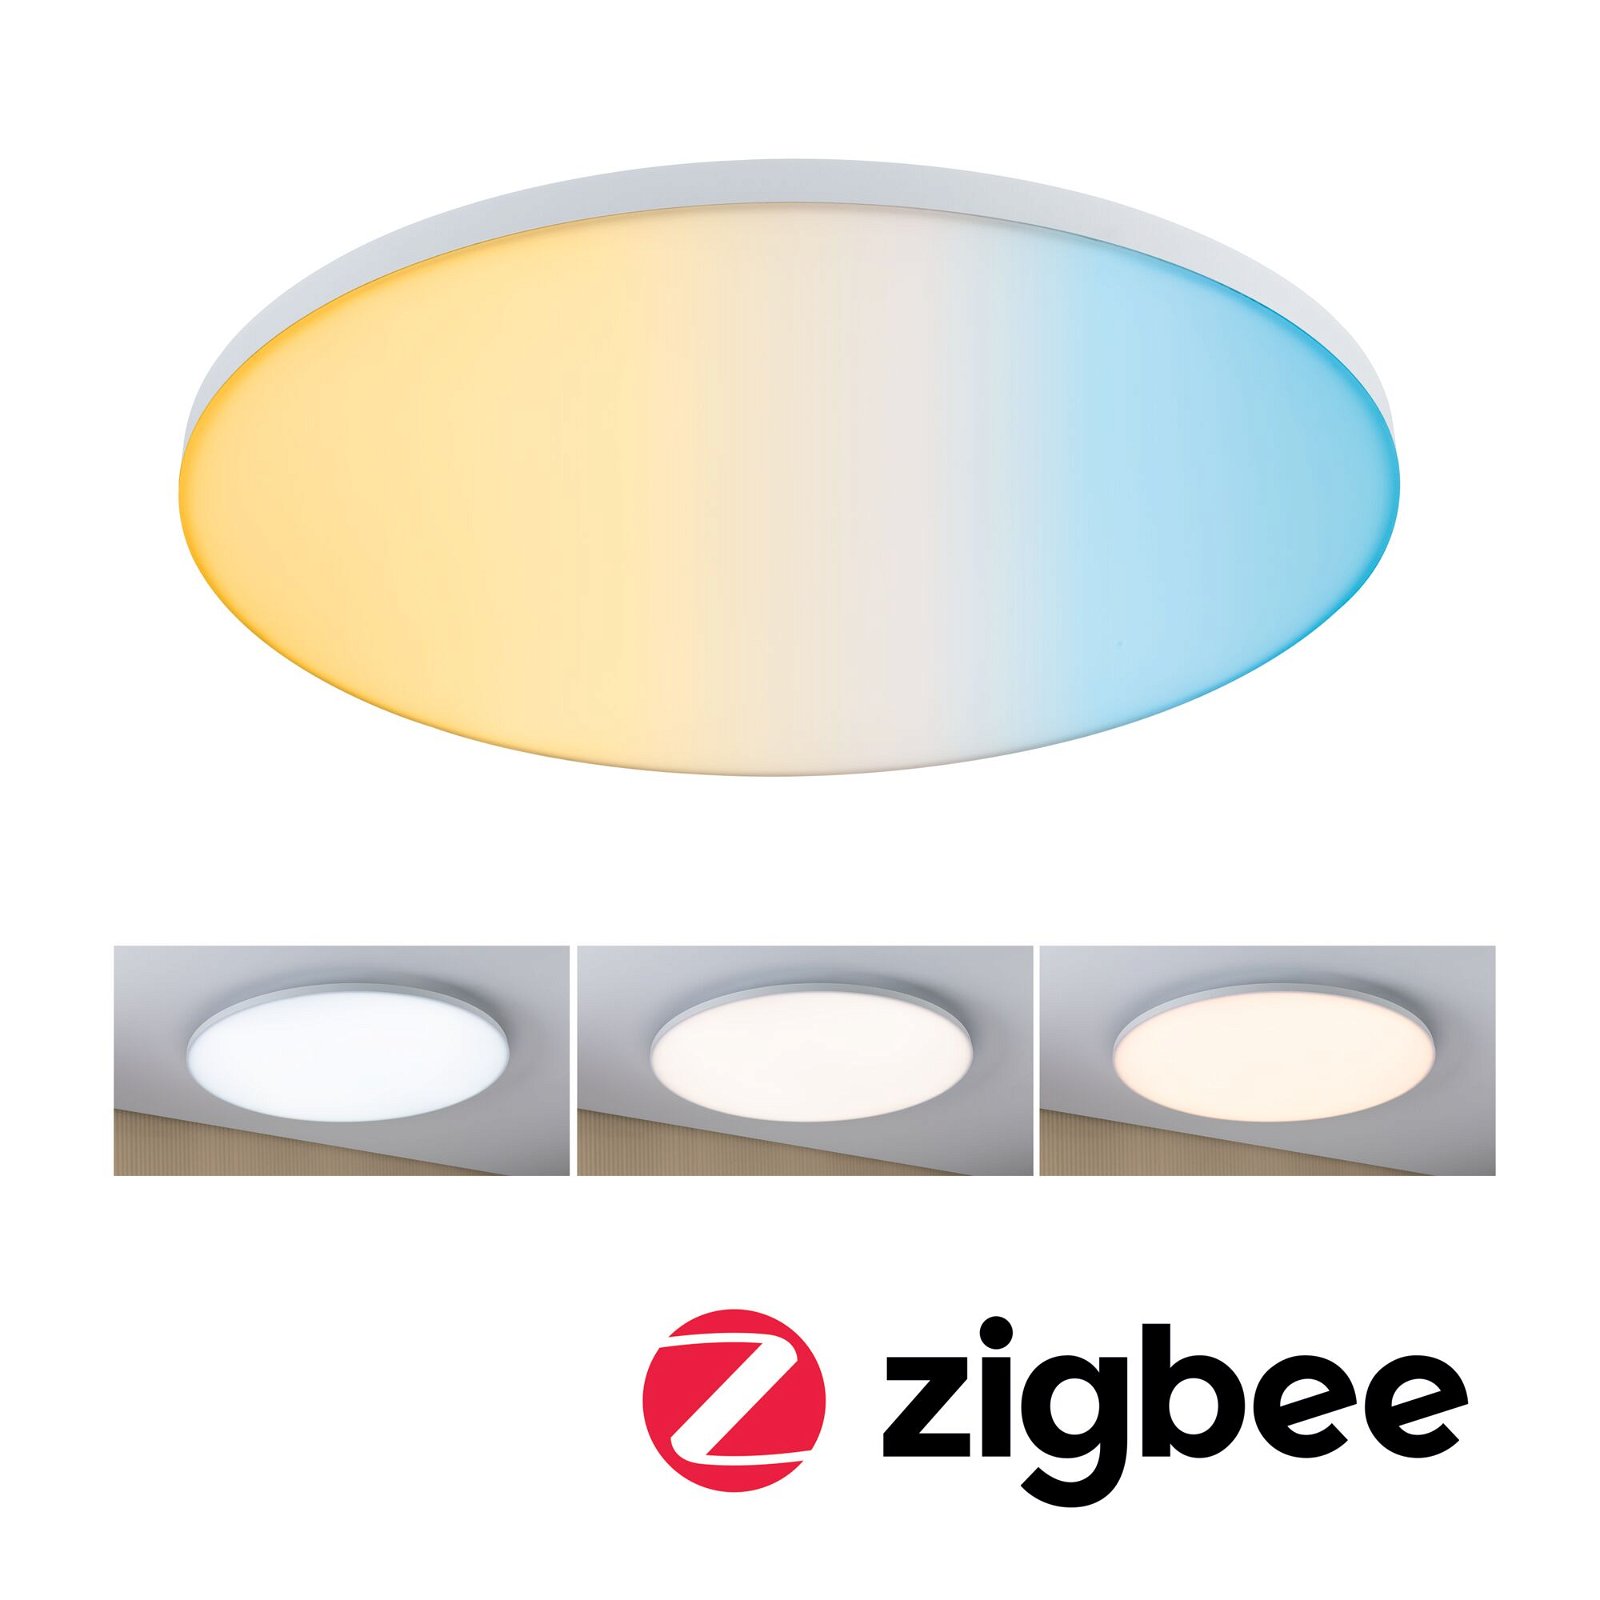 LED Panel Smart Home Zigbee Velora round 600mm 32W 3000lm Tunable White White dimmable